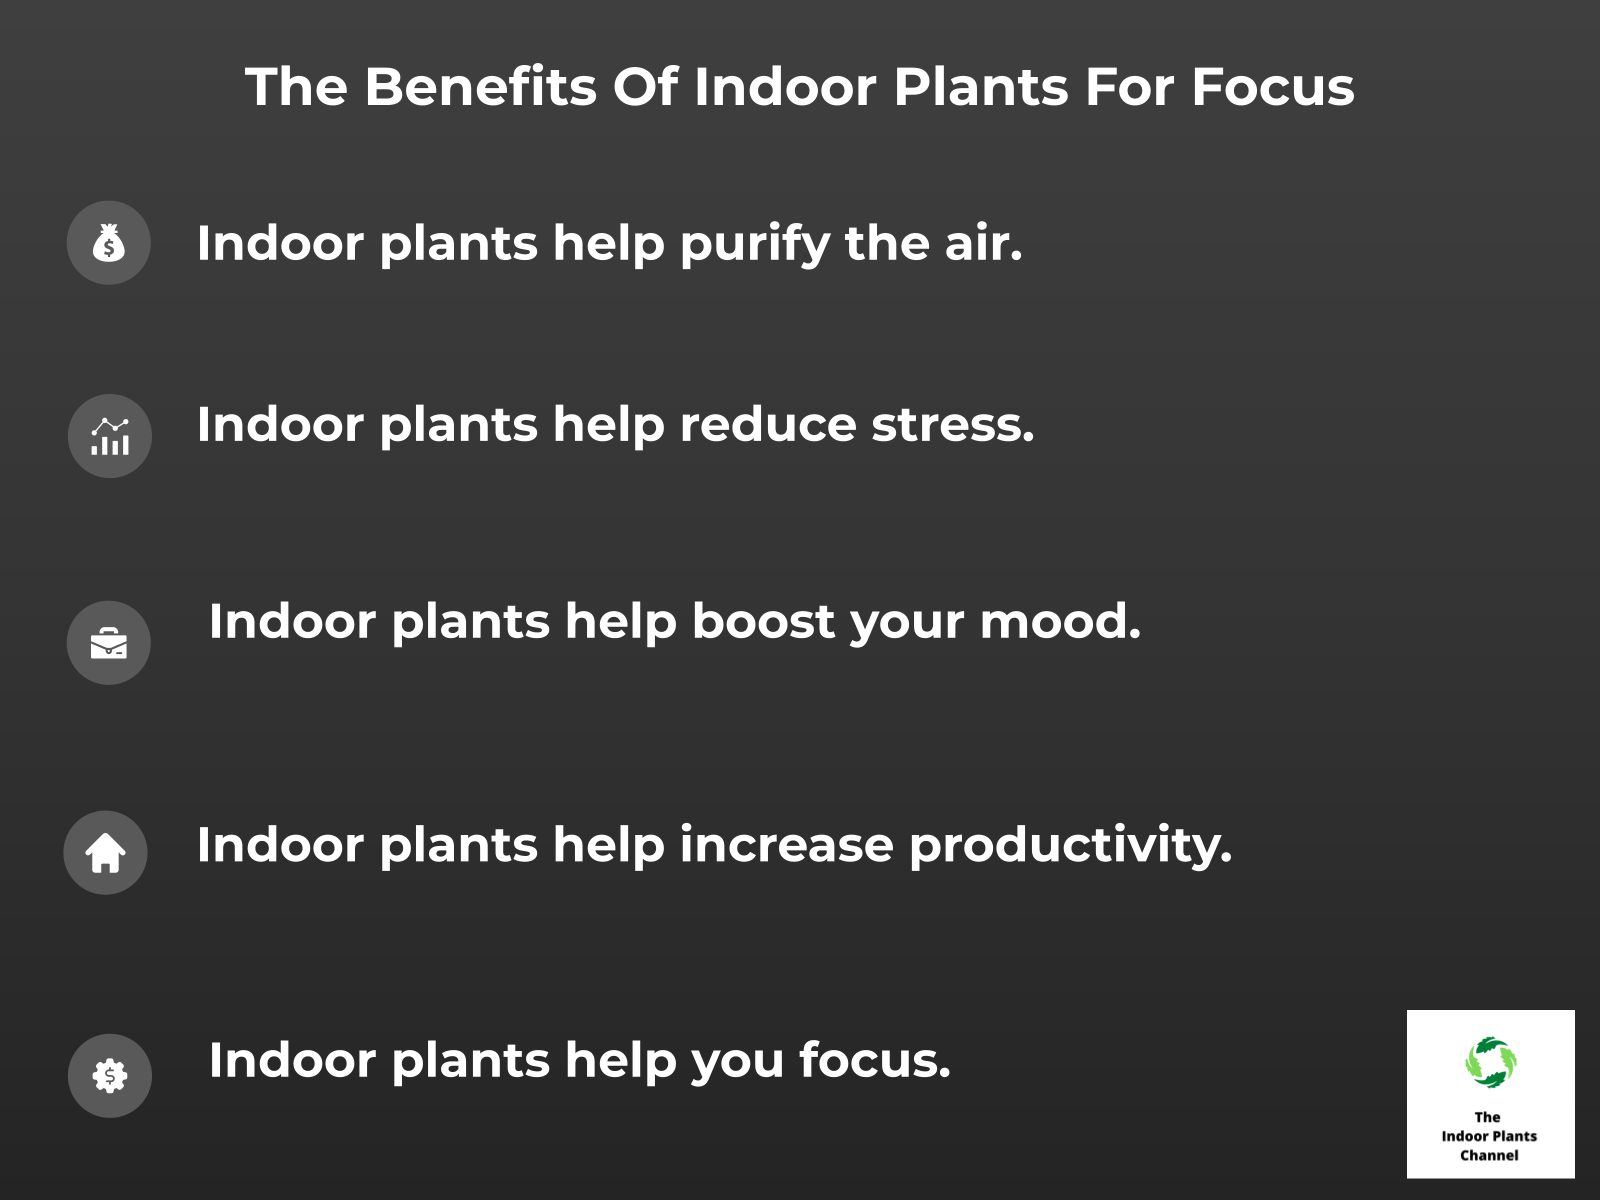 INFOGRAPHIC: The benefits of indoor plants for focus